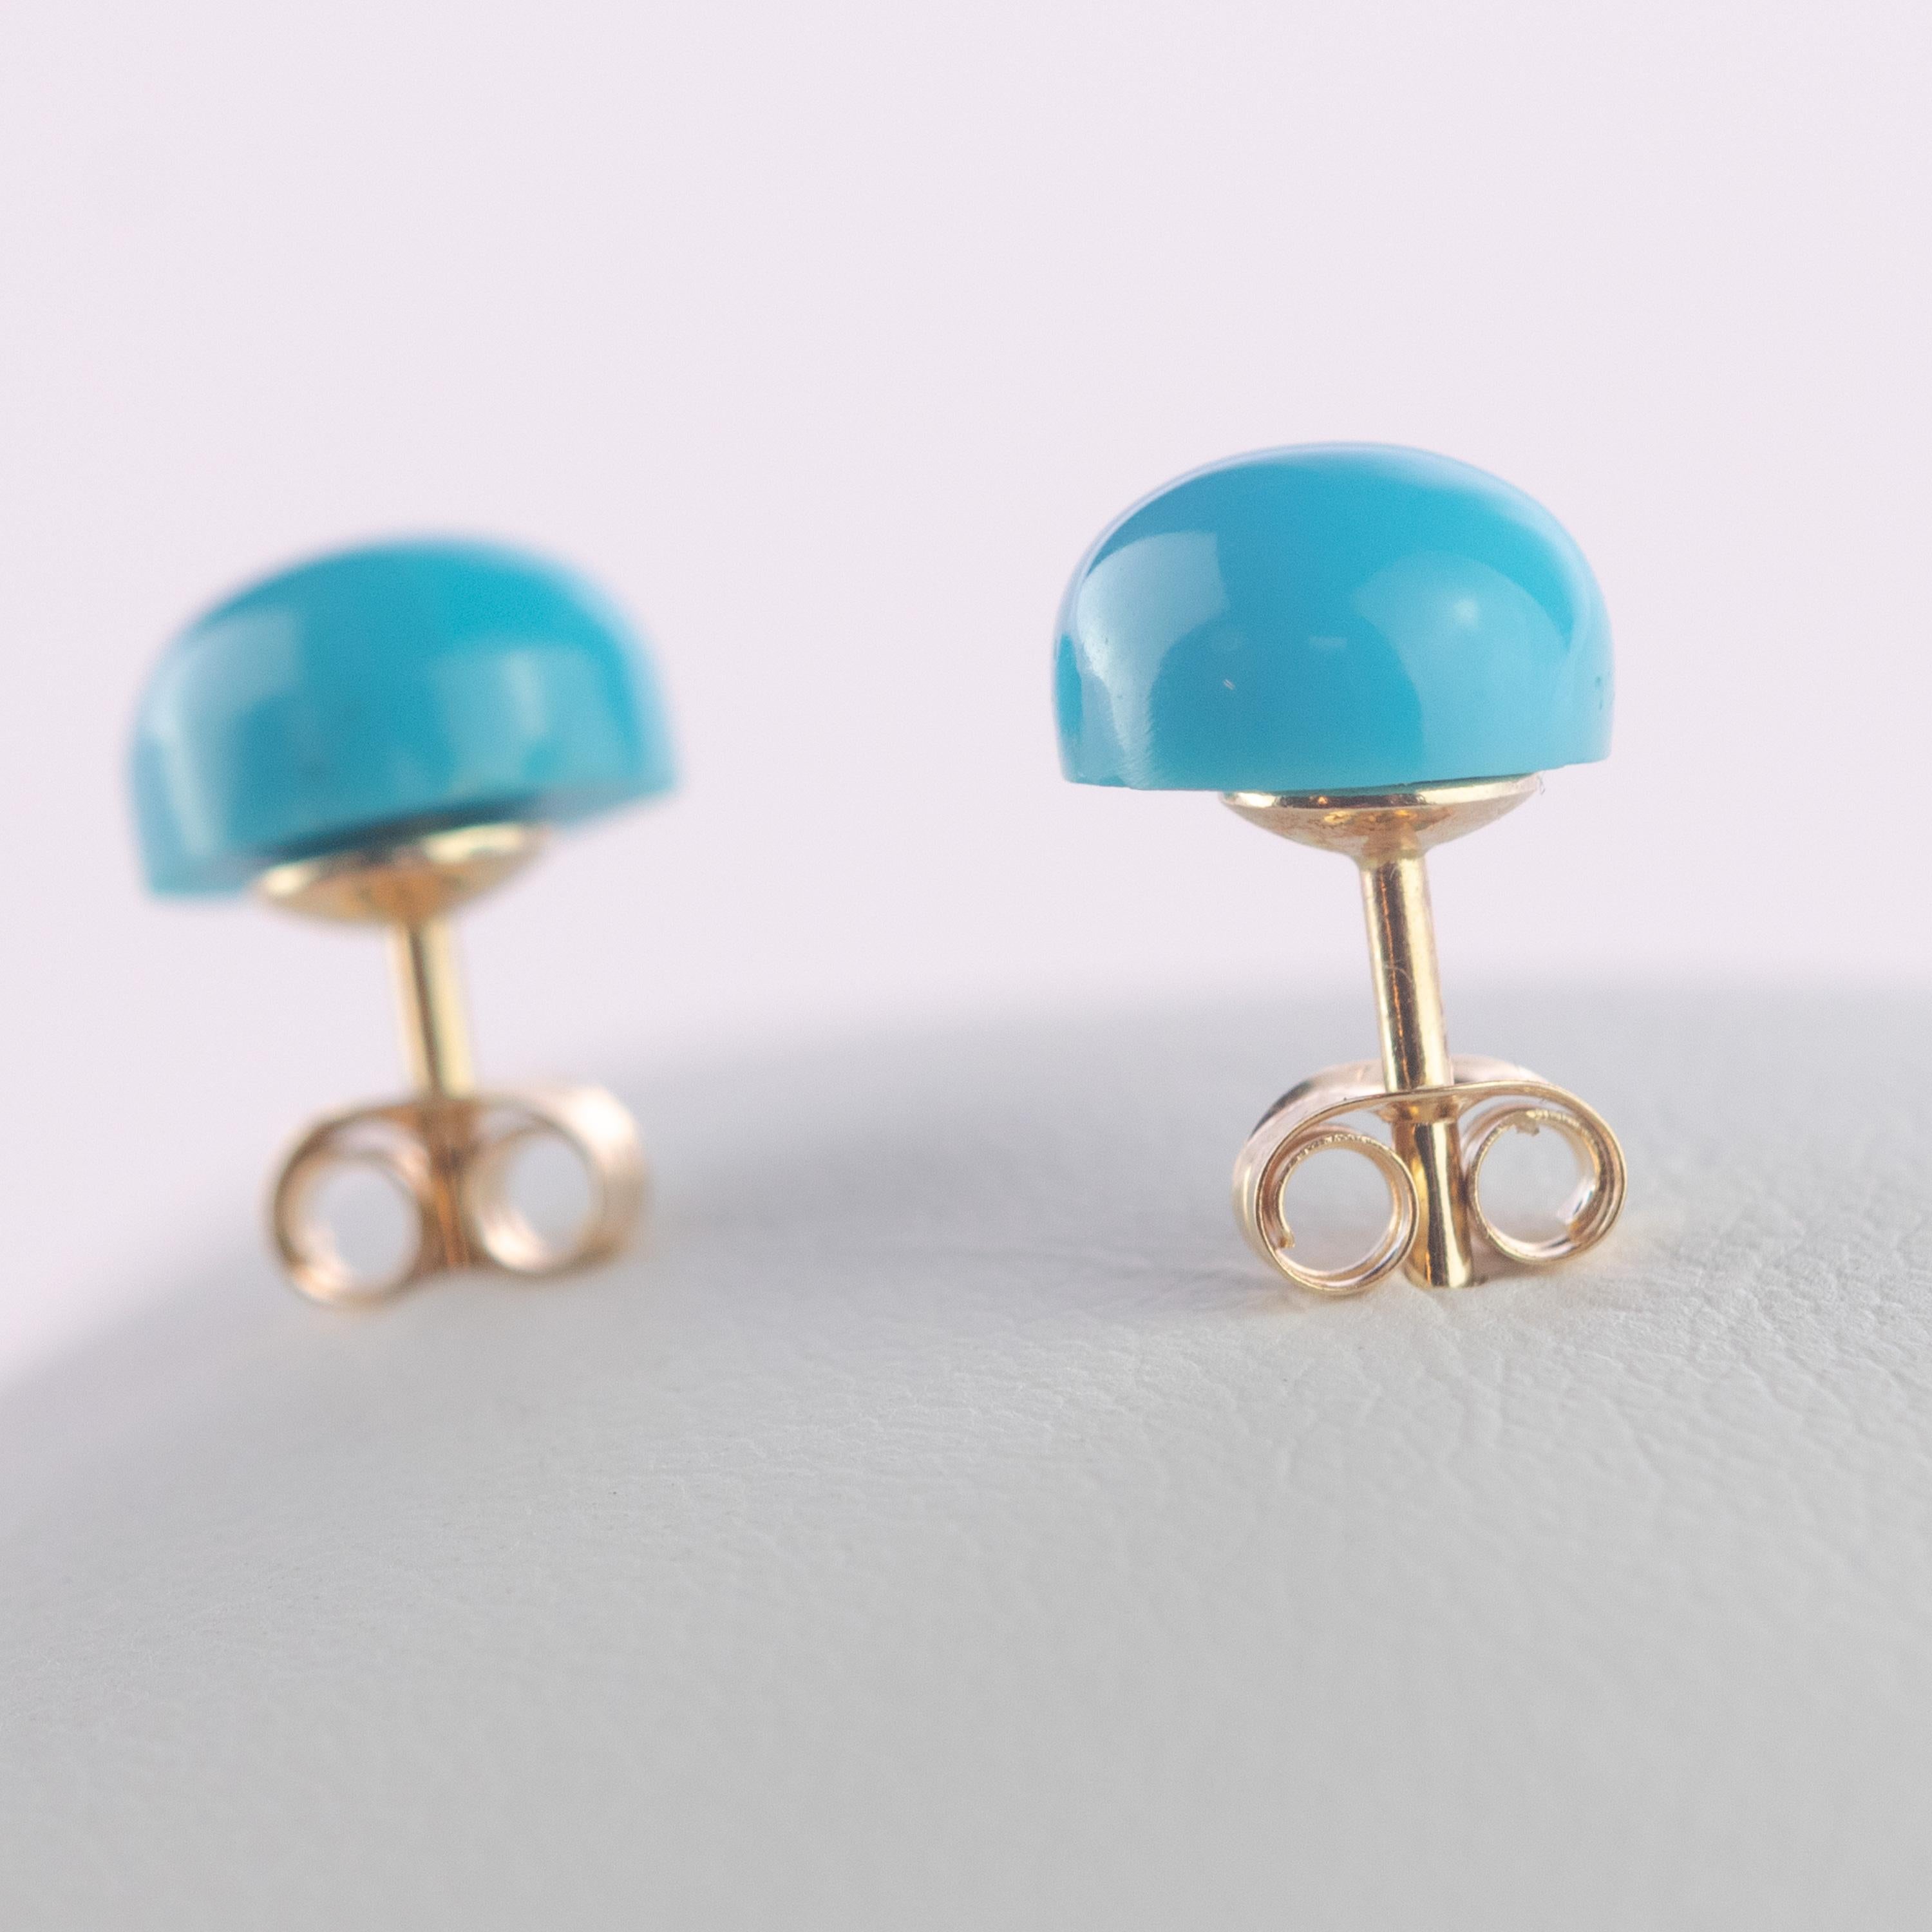 Natural Turquoise Round Cabochon 9 Karat Gold Stud Chic Cocktail Earrings For Sale 1